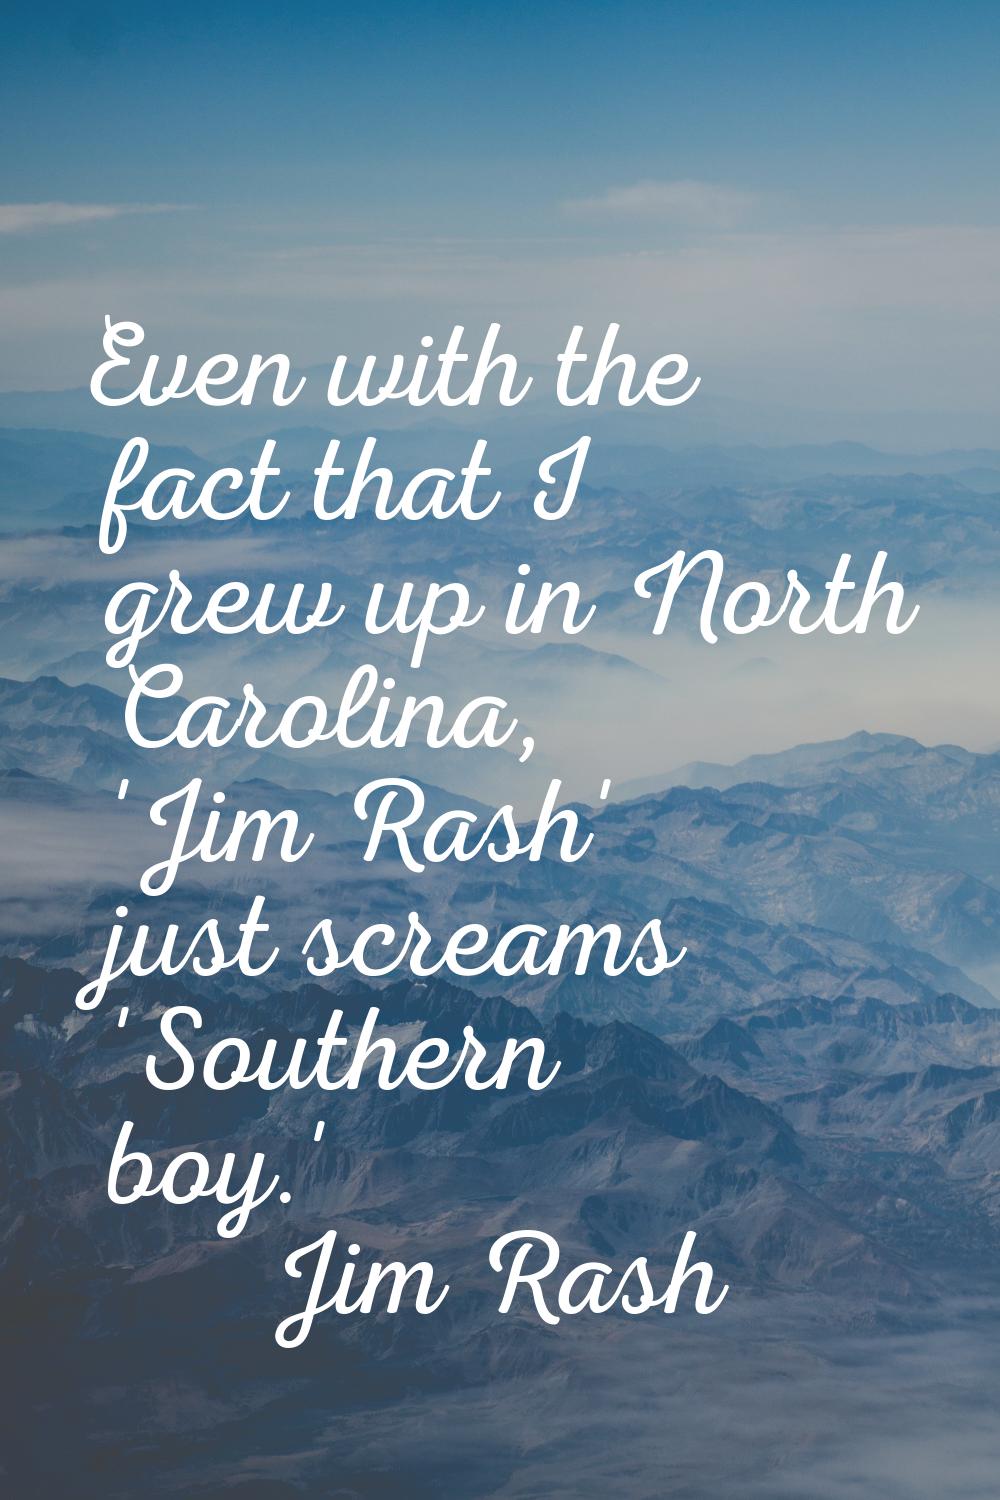 Even with the fact that I grew up in North Carolina, 'Jim Rash' just screams 'Southern boy.'